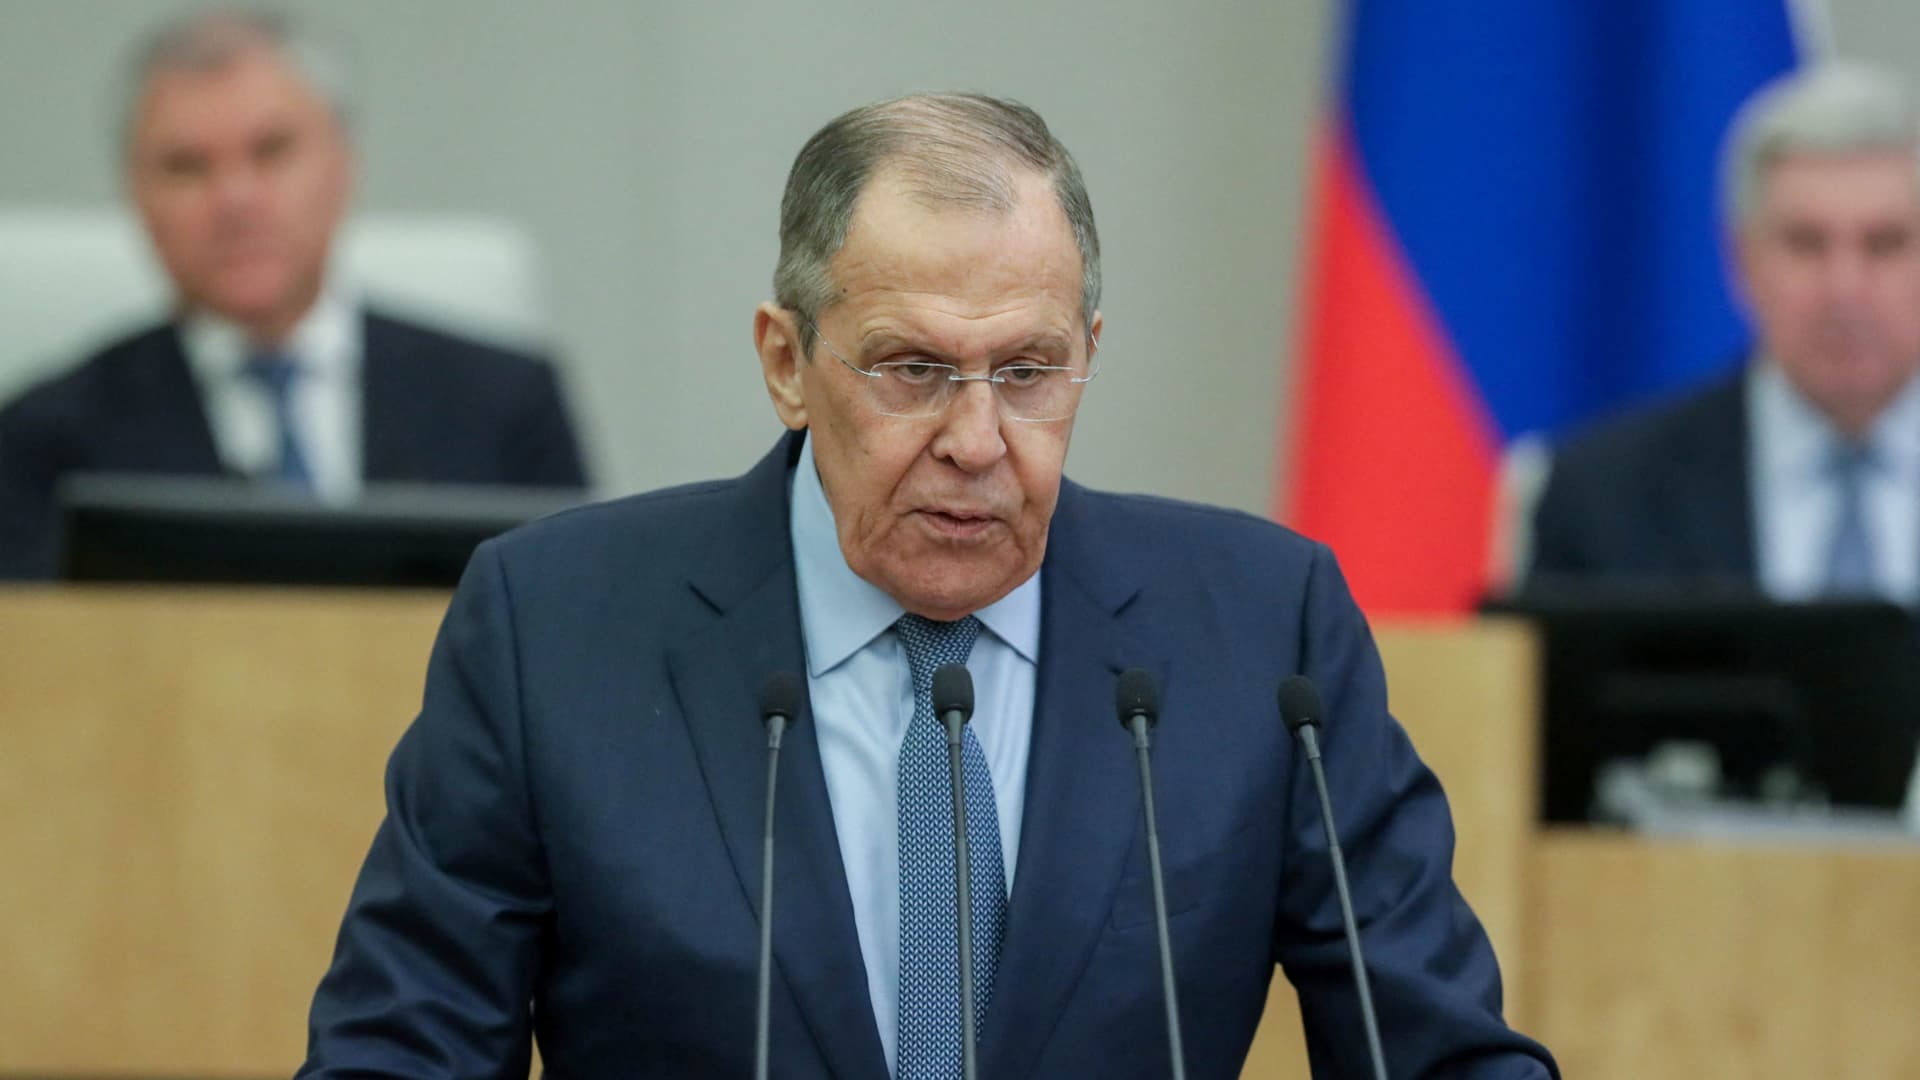 Russian Foreign Minister Sergei Lavrov is beginning a tour of Latin America on Monday, with scheduled visits to Brazil, Venezuela, Nicaragua and Cuba.